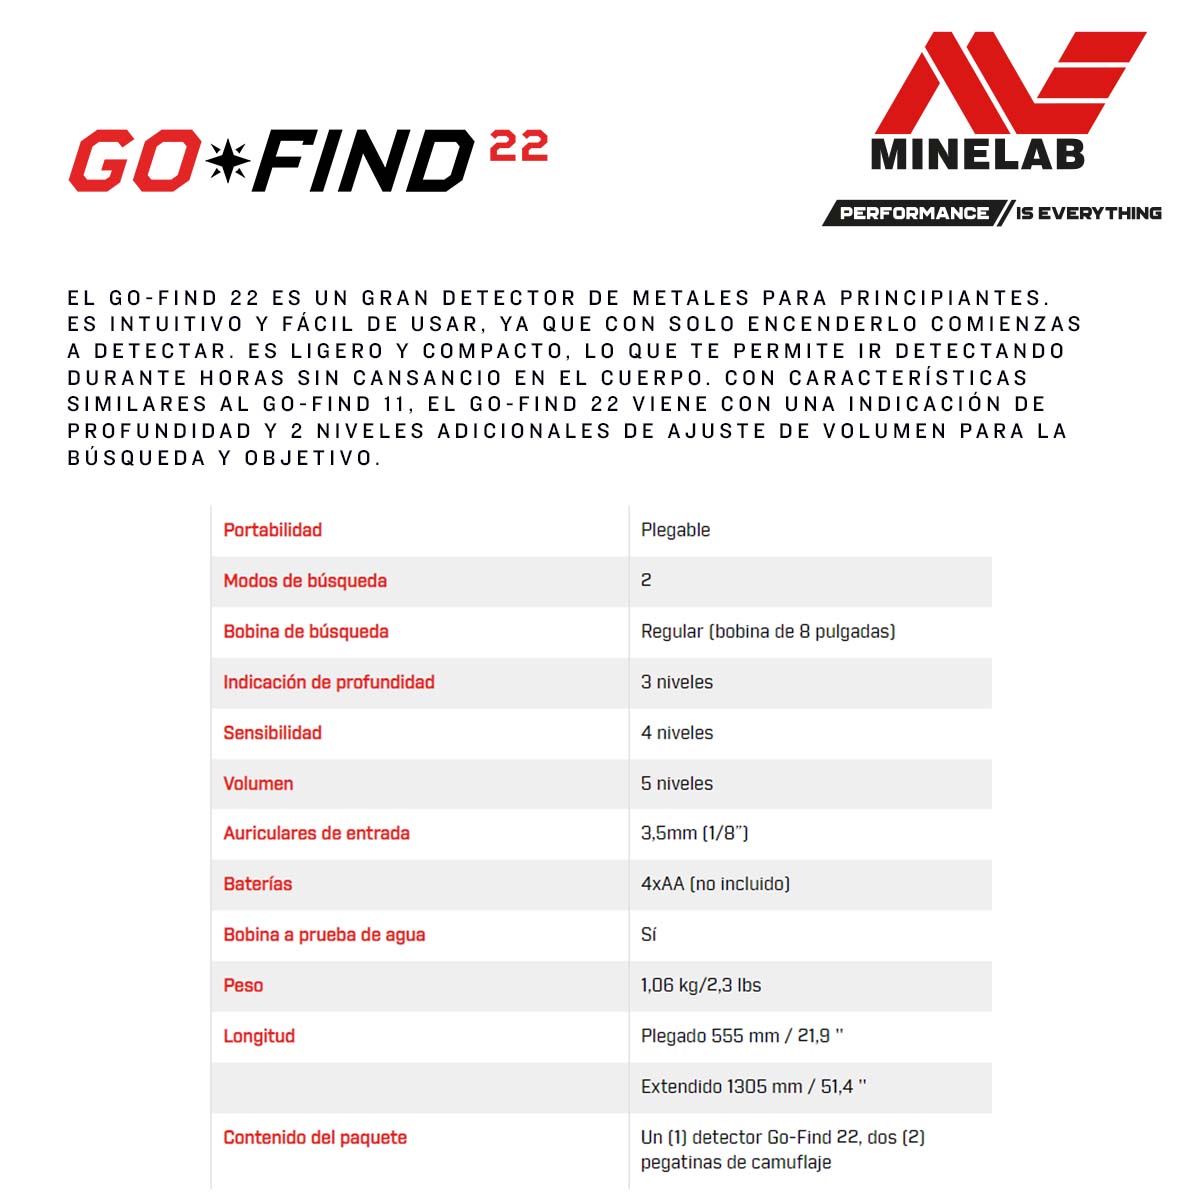 go-find 22